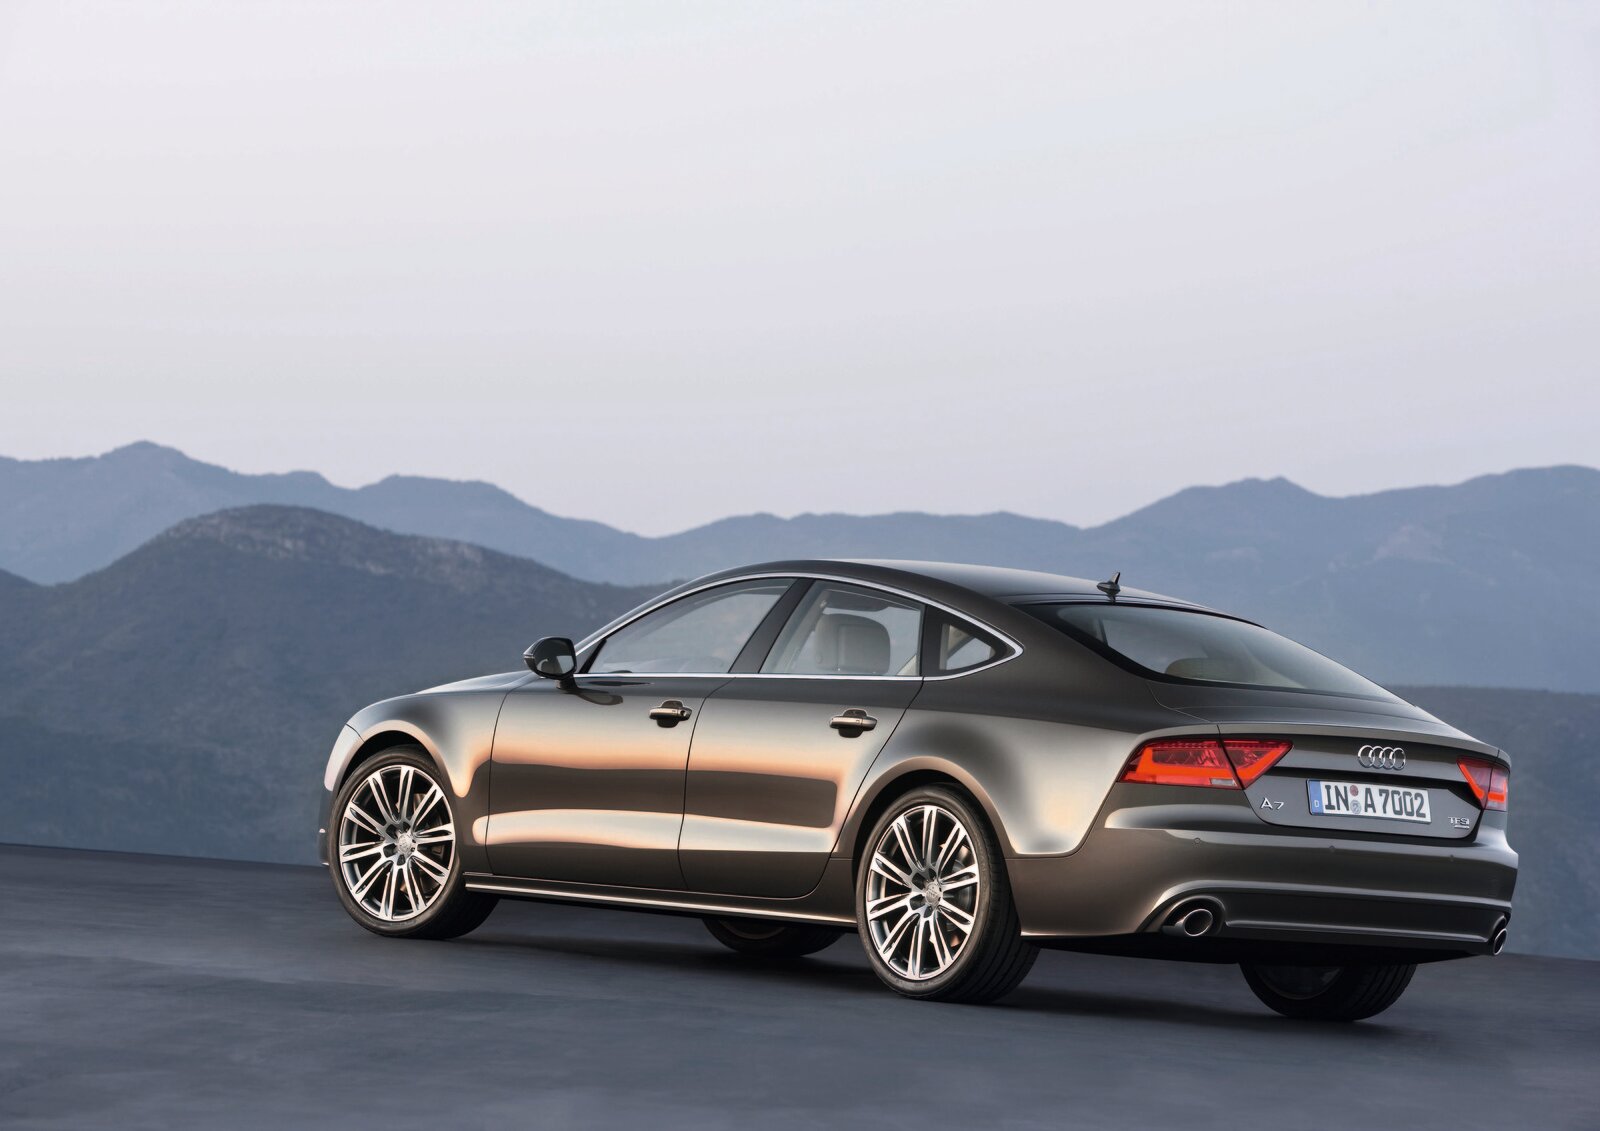 2012 Audi A7 Priced: $59,250 For 310-HP Supercharged V-6